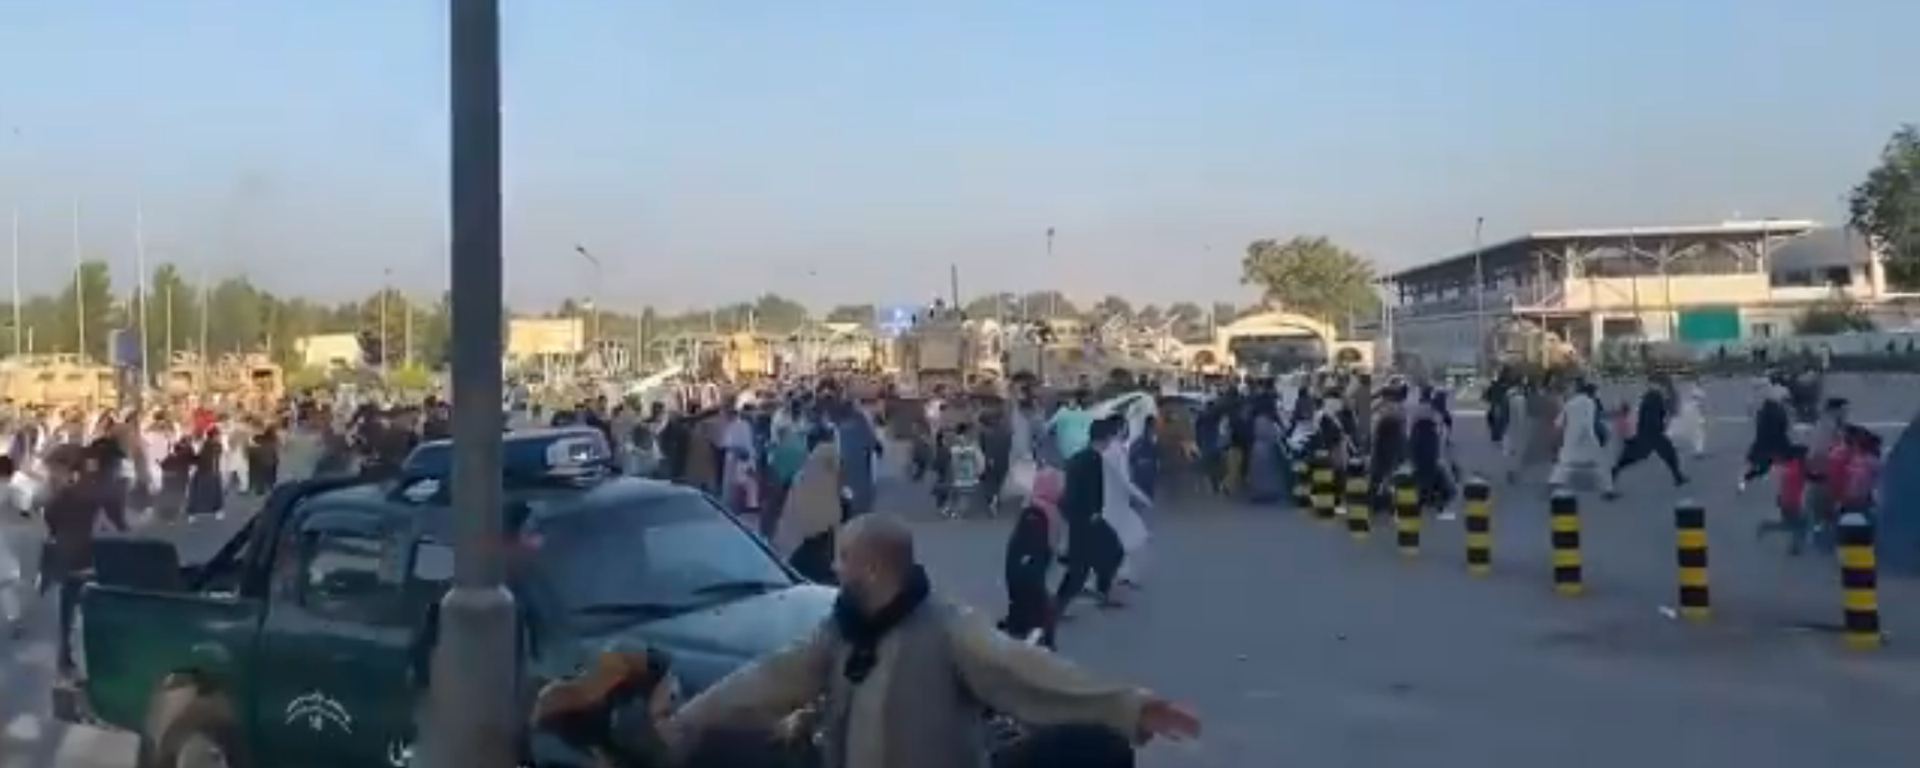 Screenshot from a video allegedly showing a crowd of people rushing to the Kabul international airport as gunshots are heard - Sputnik International, 1920